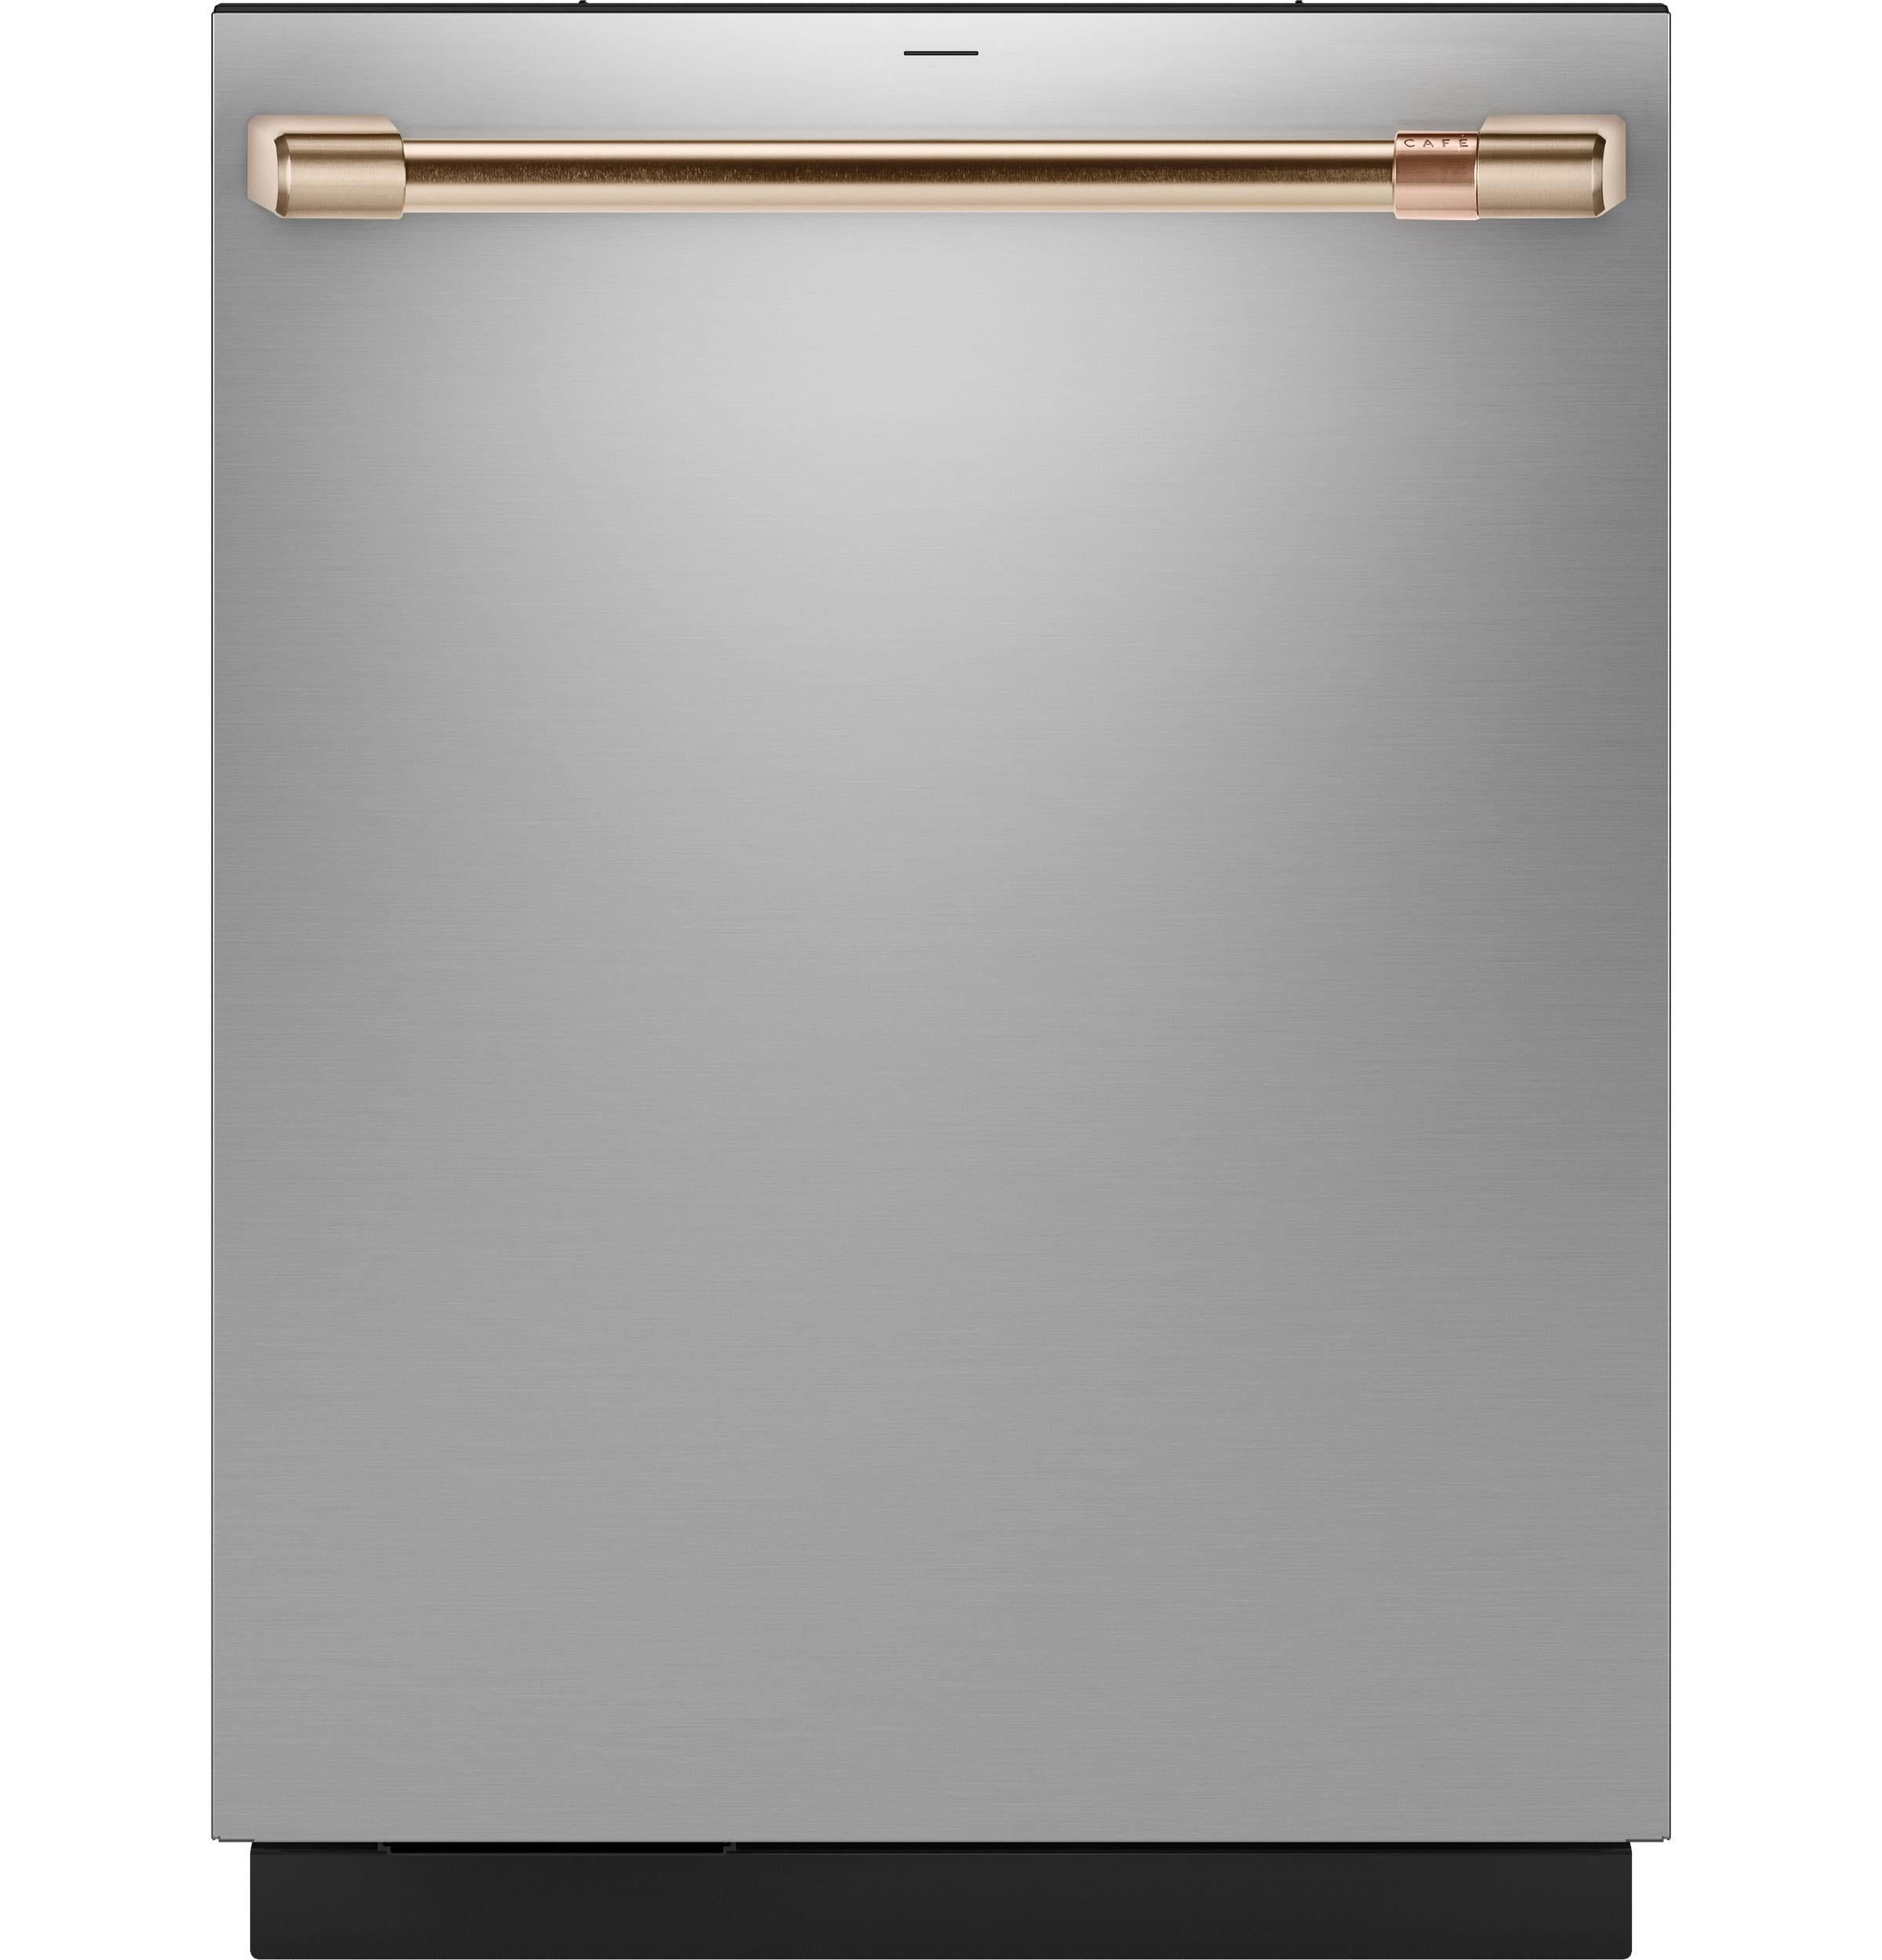 Cafe Caf(eback)™ CustomFit ENERGY STAR Stainless Interior Smart Dishwasher with Ultra Wash Top Rack and Dual Convection Ultra Dry, LED Lights, 39 dBA